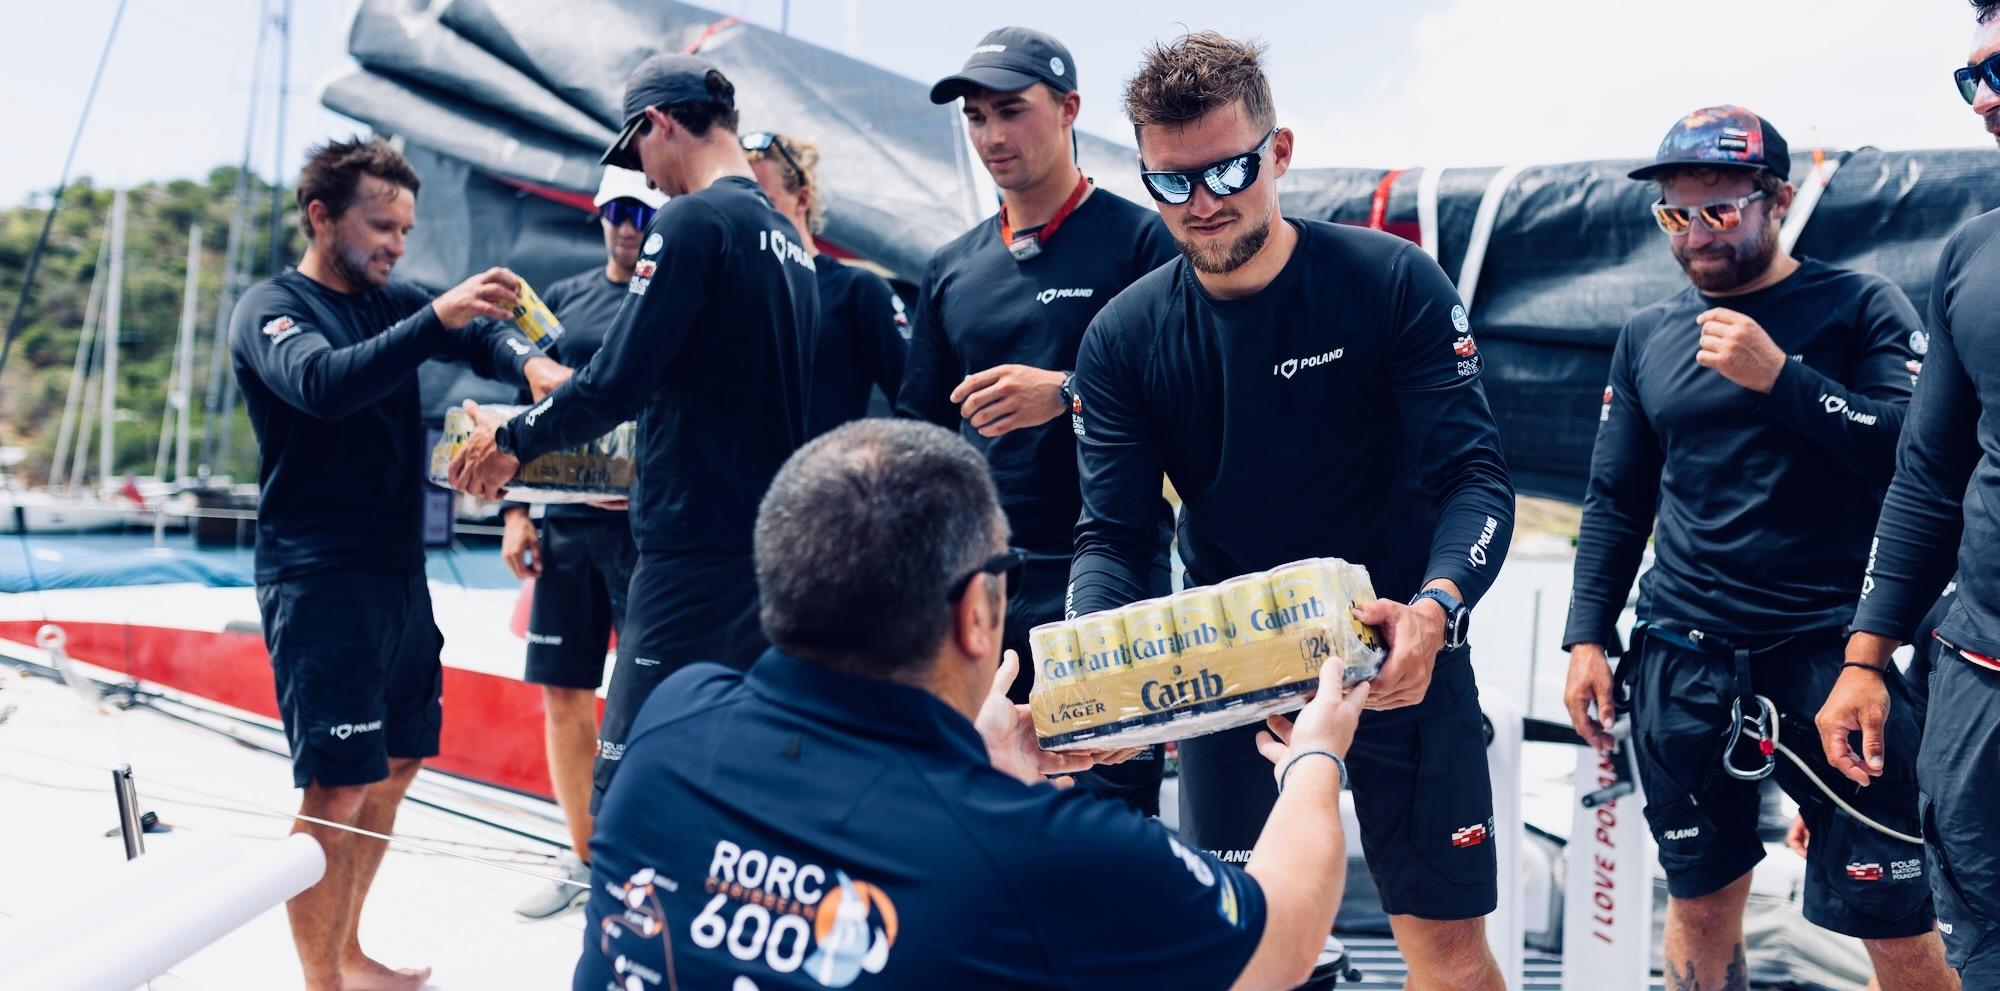 The RORC Nelson’s Cup Series kicks off on Tuesday 13 February, with sponsors of the 2nd Nelson’s Cup and 15th RORC Caribbean 600 busy preparing for the annual influx of boats and teams from around the world.